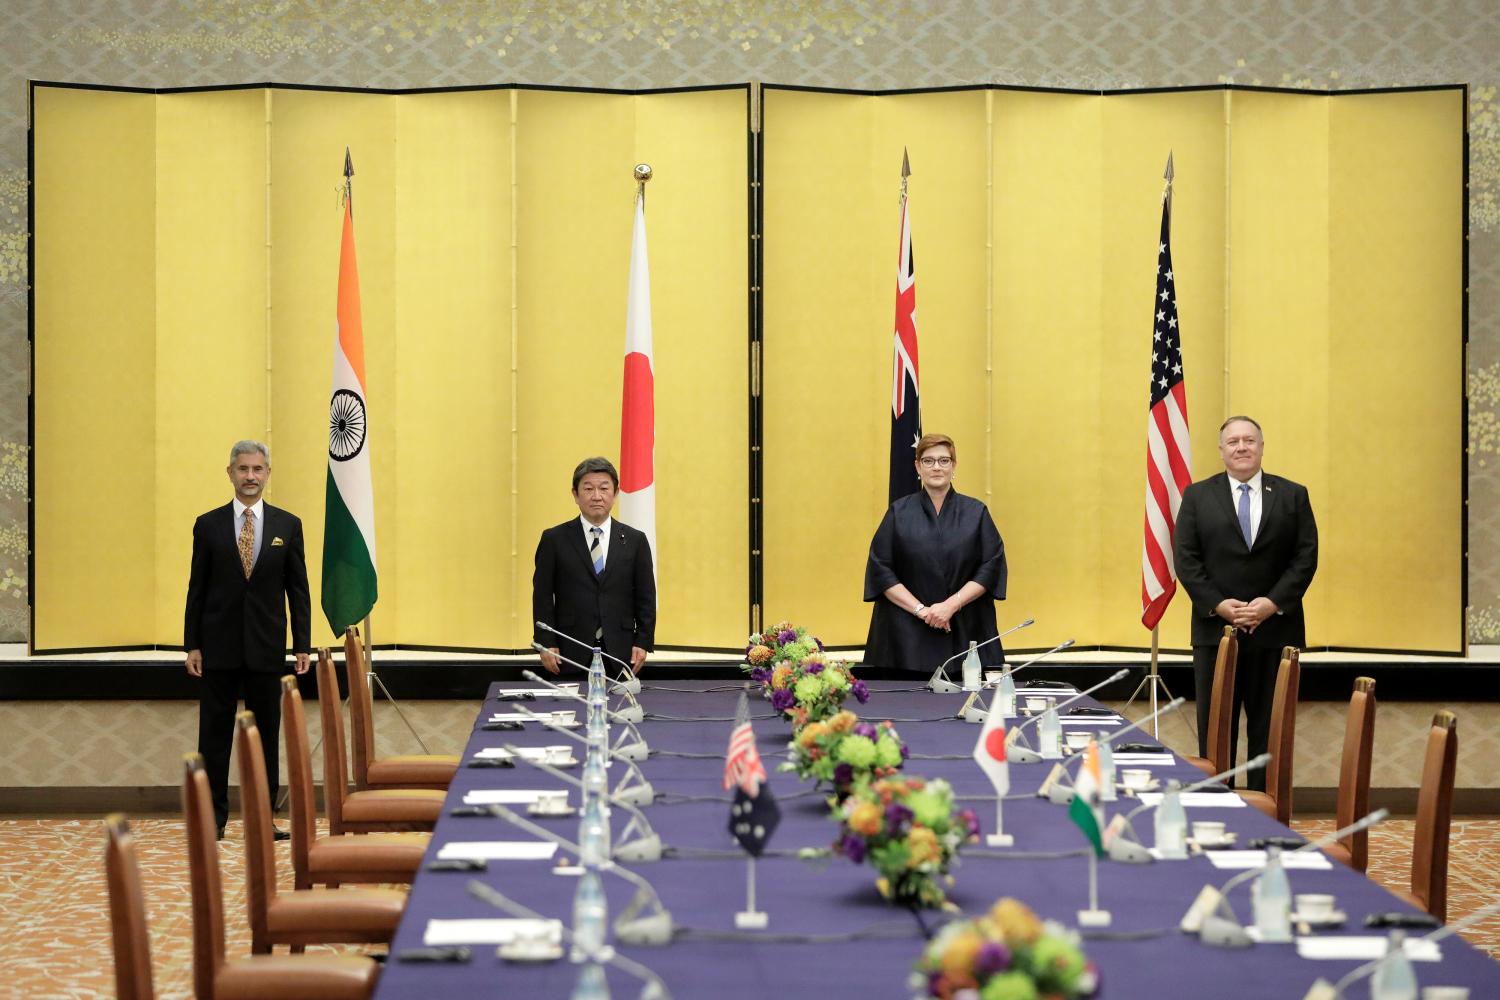 Indian Foreign Minister Subrahmanyam Jaishankar, Japan's Foreign Minister Toshimitsu Motegi, Australia's Foreign Minister Marise Payne and U.S. Secretary of State Mike Pompeo pose for a picture prior the Quad ministerial meeting in Tokyo, Japan October 6, 2020. Kiyoshi Ota/Pool via REUTERS